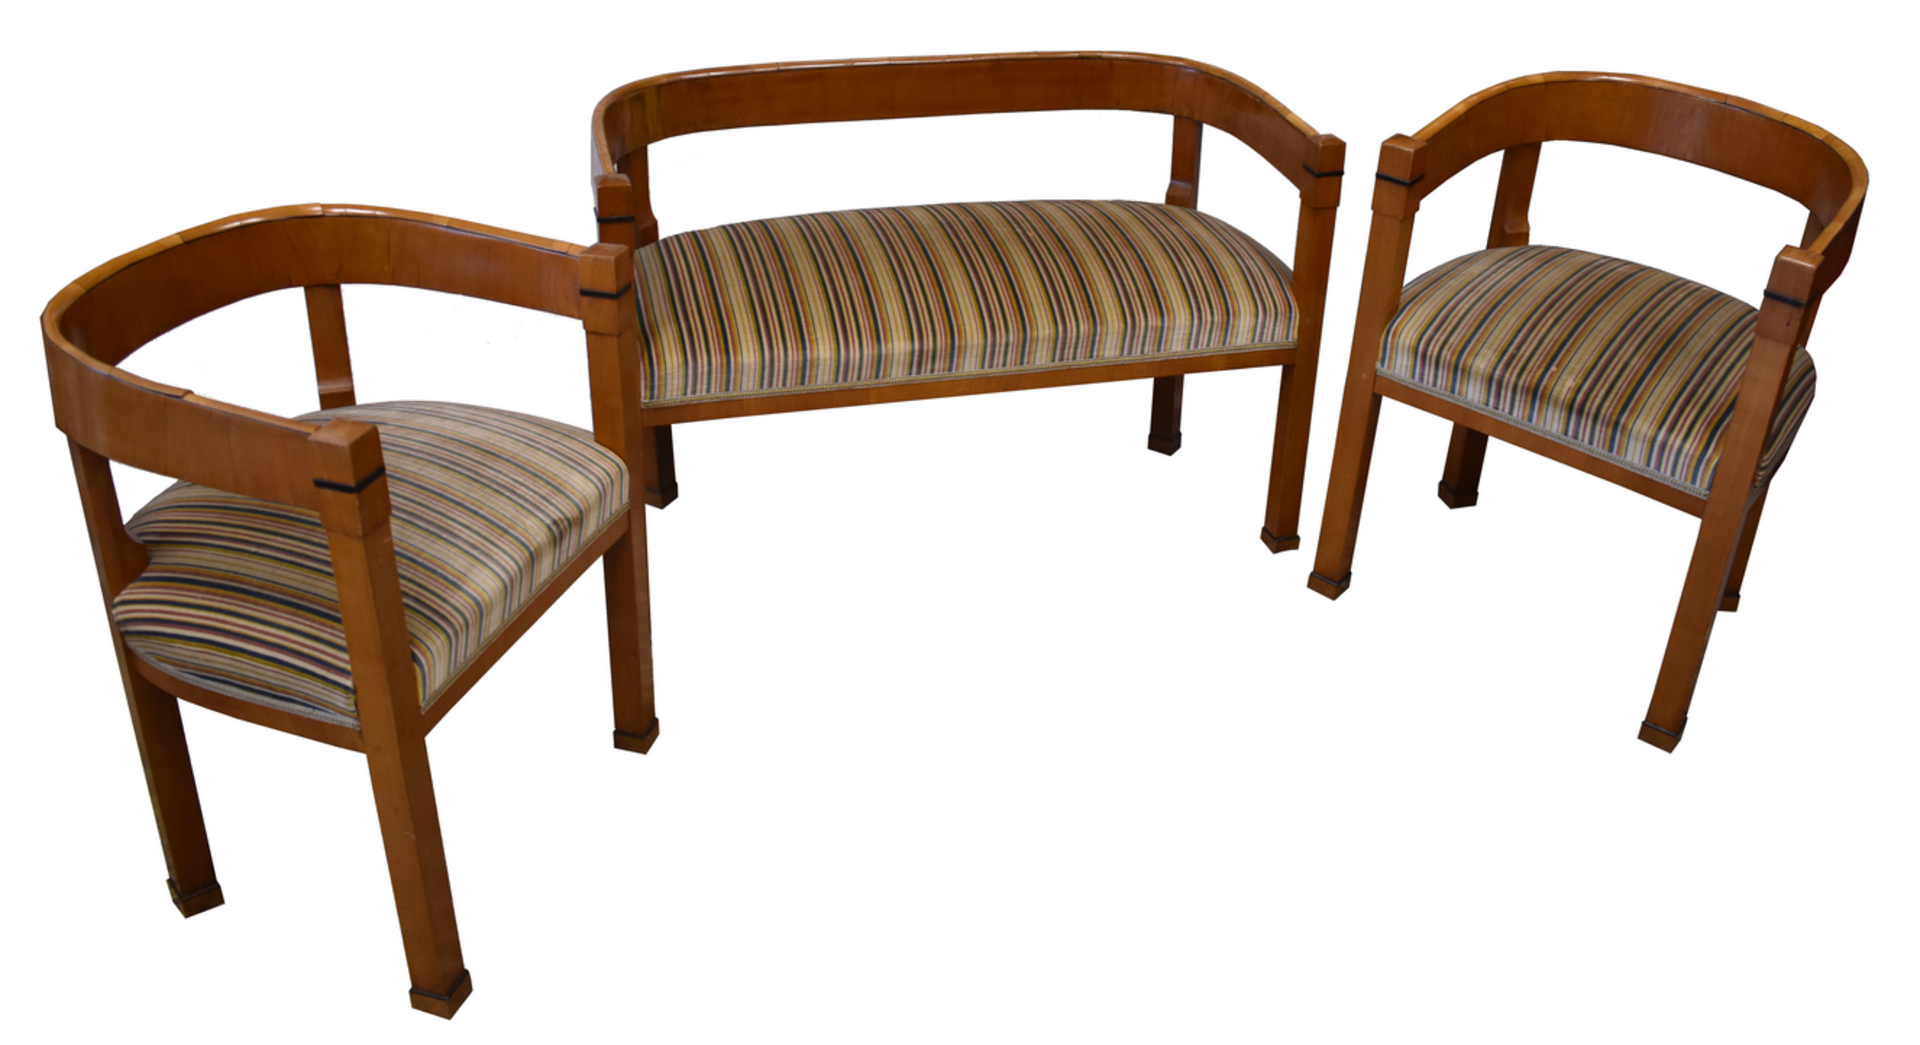 Late 19th century, biedermeier Set in the manner of Joseph Ulrich Danhauser, 1 setee with 2 arm